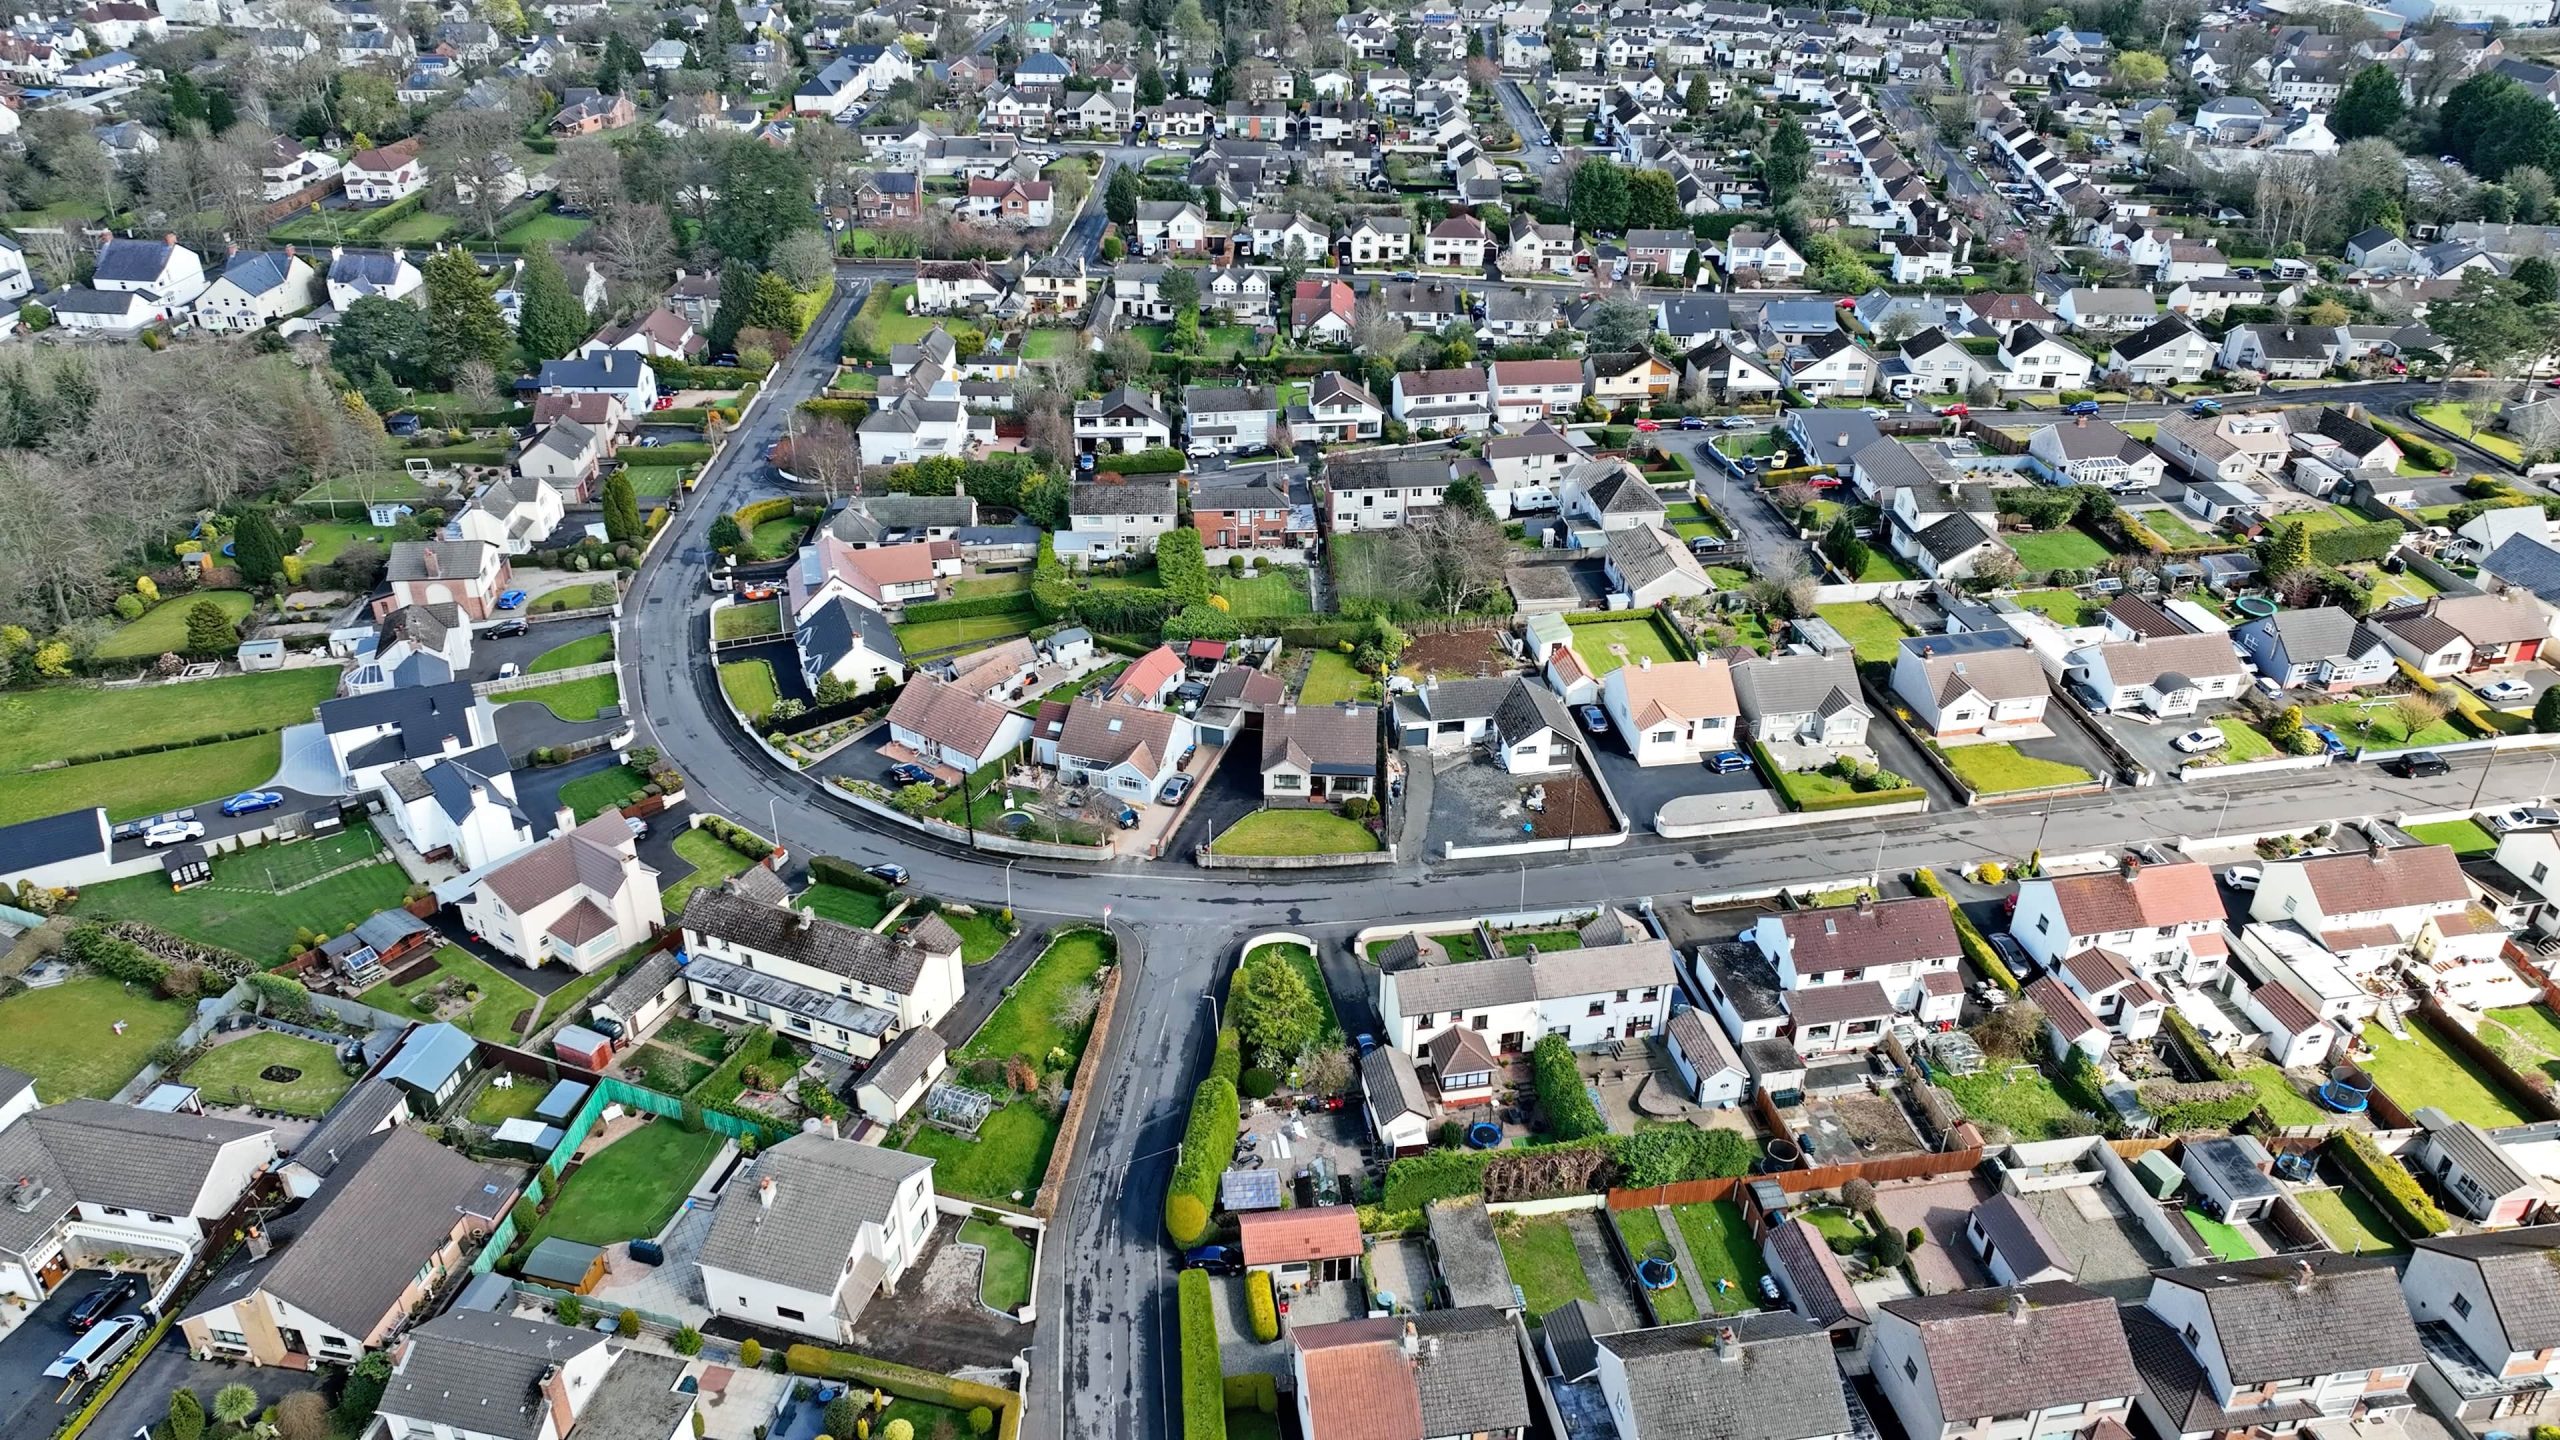 Northern Ireland Defy Expectations to Exceed Housing Targets